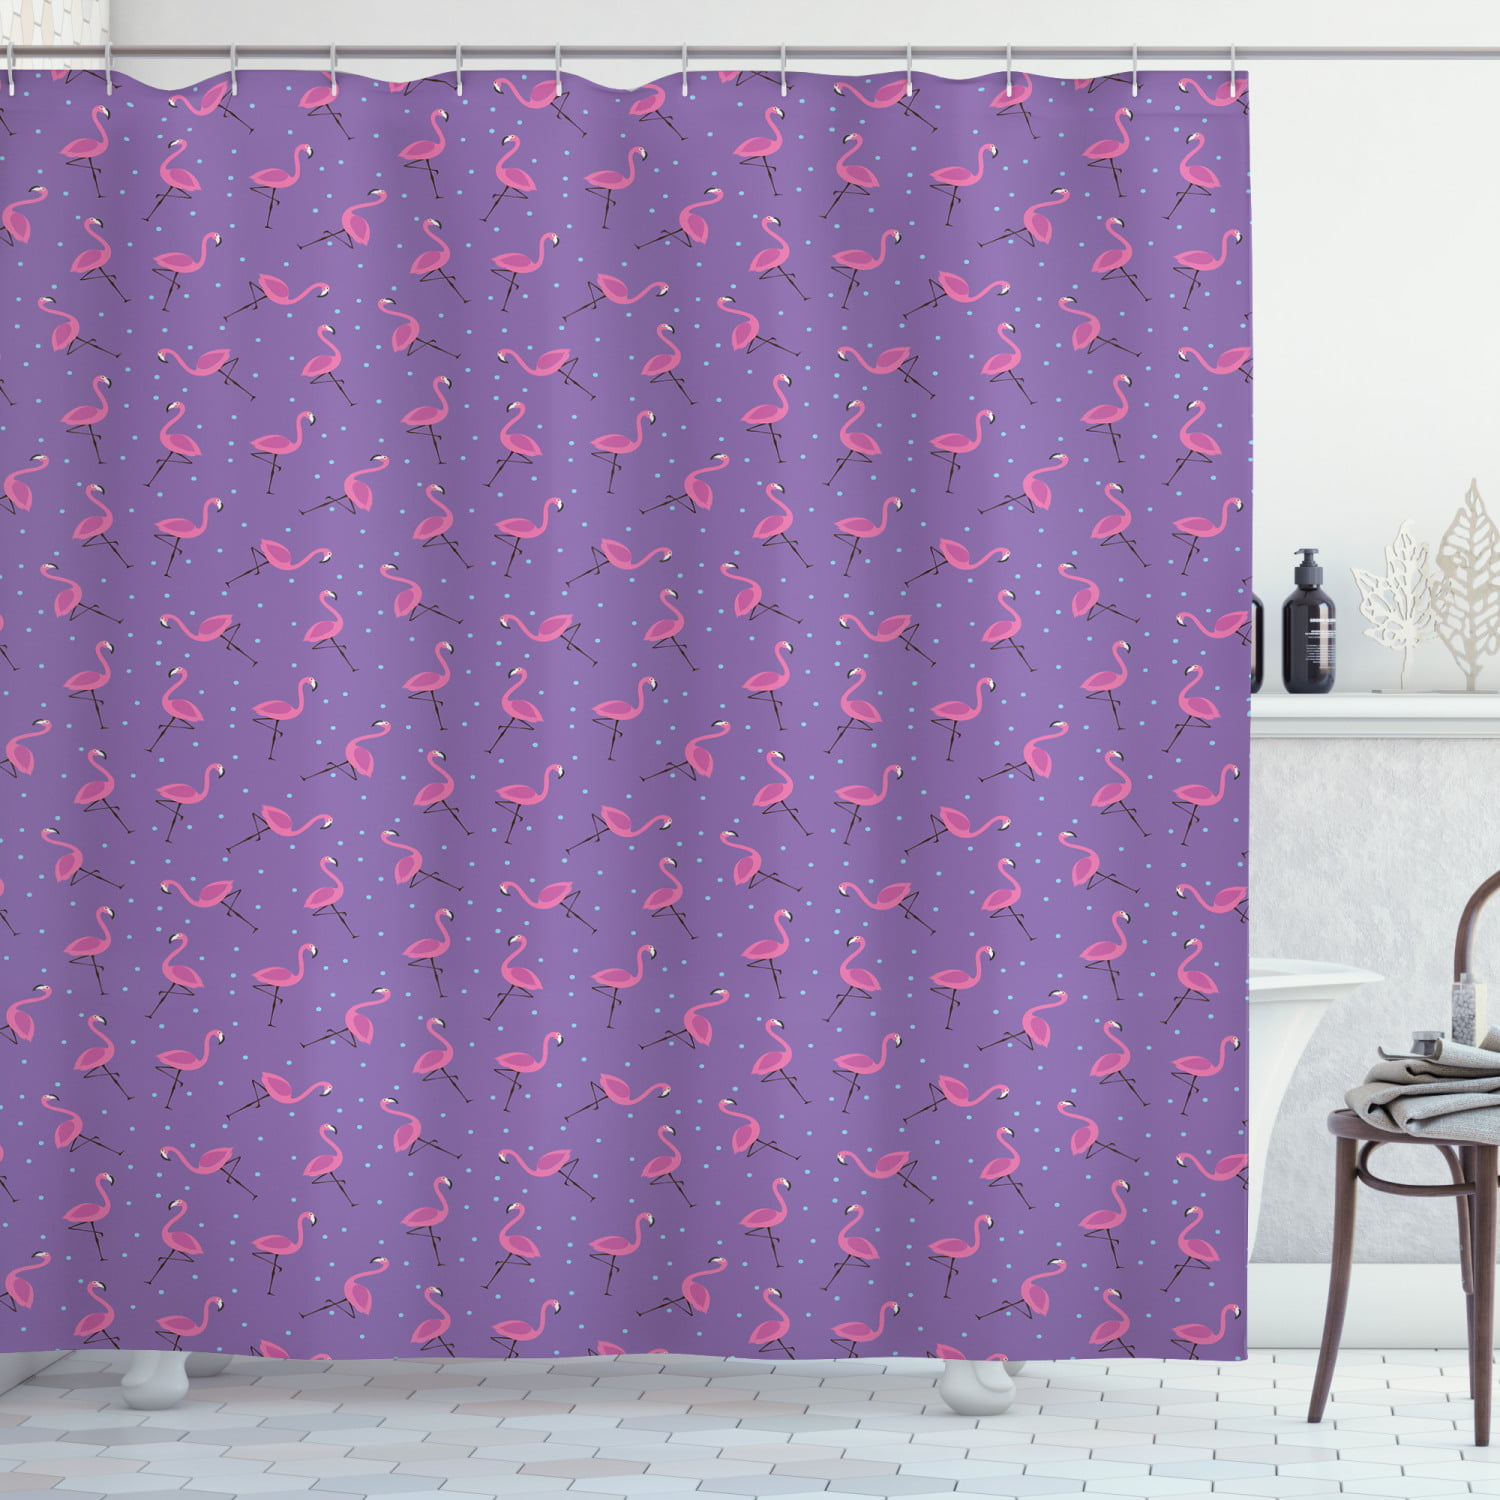 A pink flamingo Shower Curtain Waterproof Polyester Fabric & 12Hooks 71*71inches 